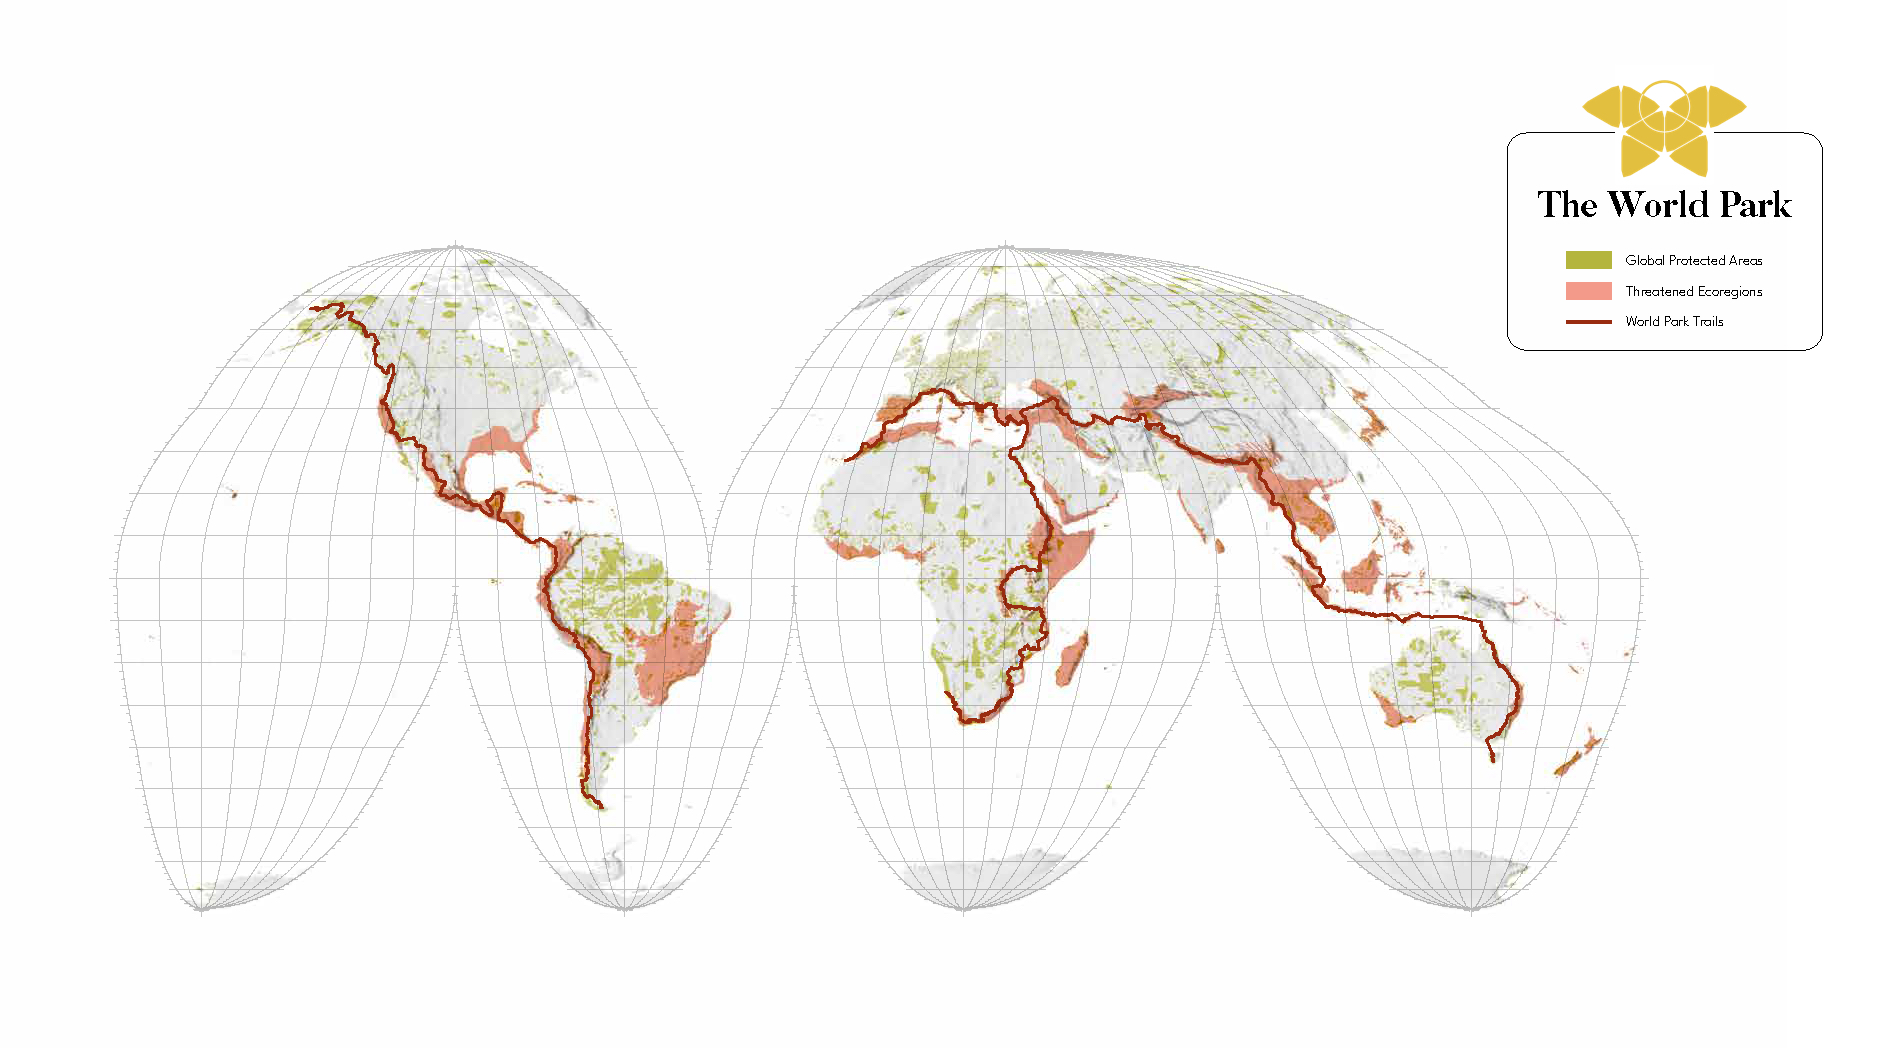 A flattened image of the globe shows global protected areas, threatened eco-regions, and three proposed World Park trails. 